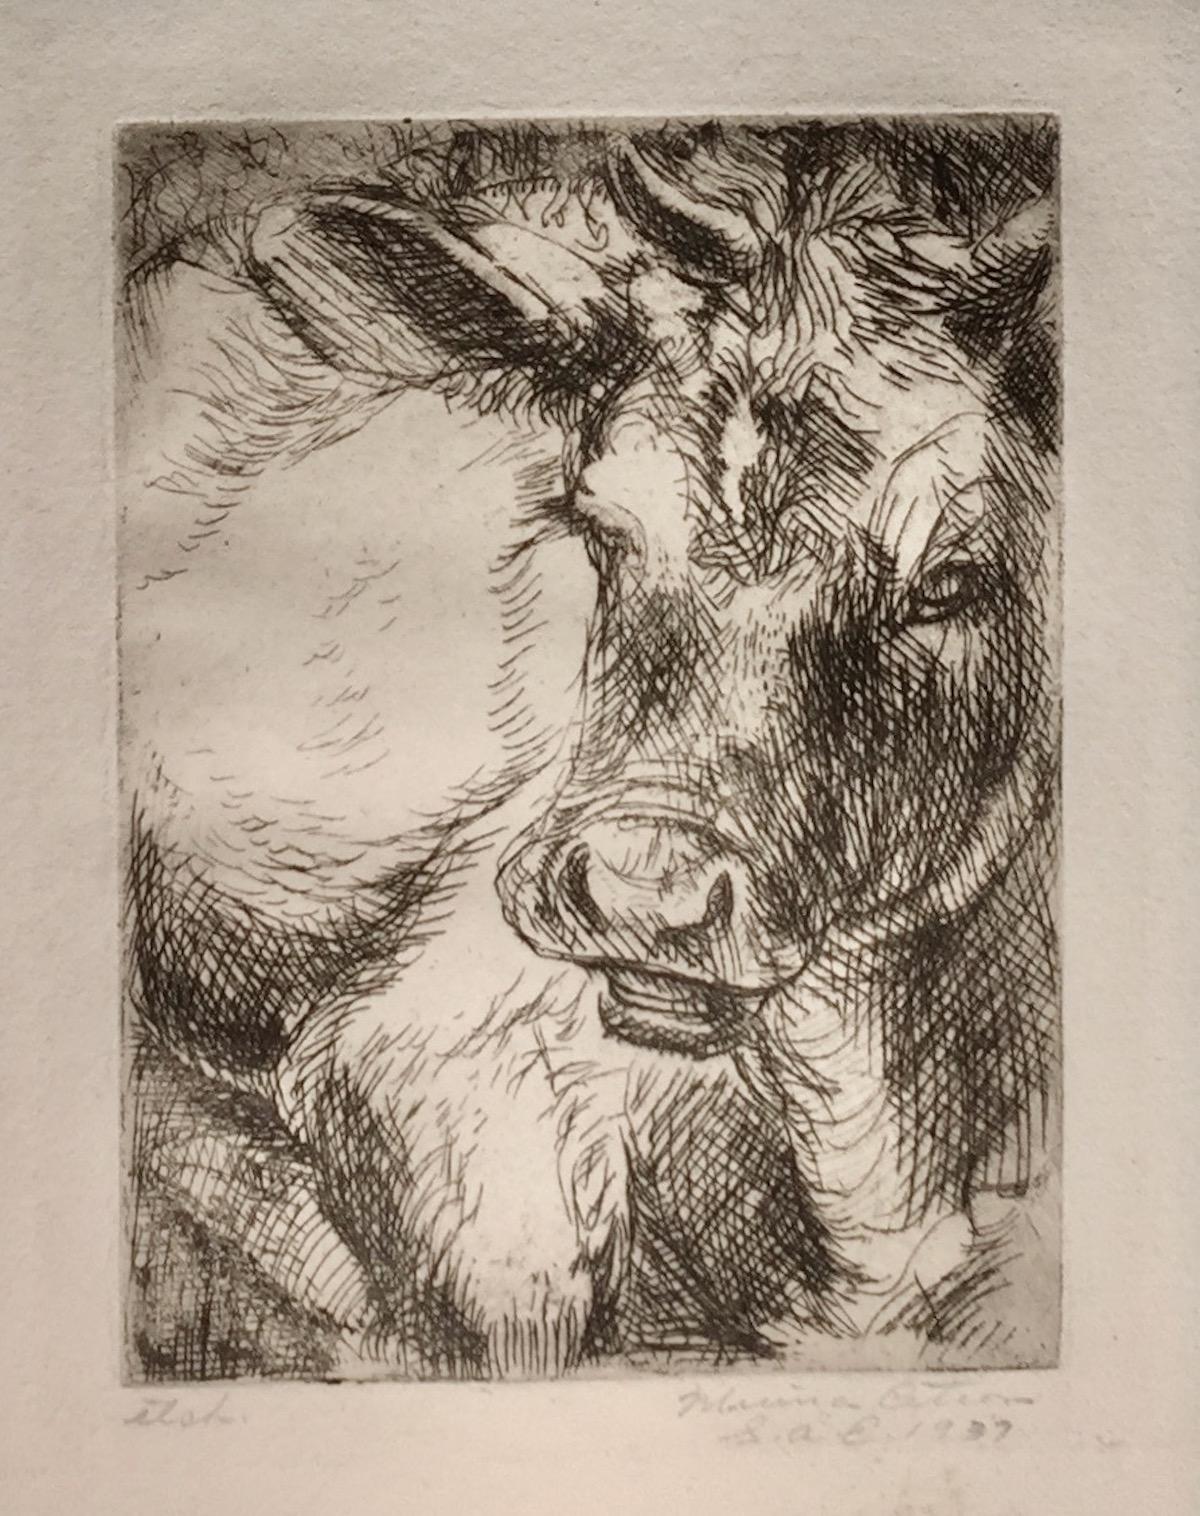 This subject, Heifer,  relates to Citron's mural project focusing on the Tennessee Valley Authority.

It is signed, dated, and annotated 'Etch.' in pencil.
